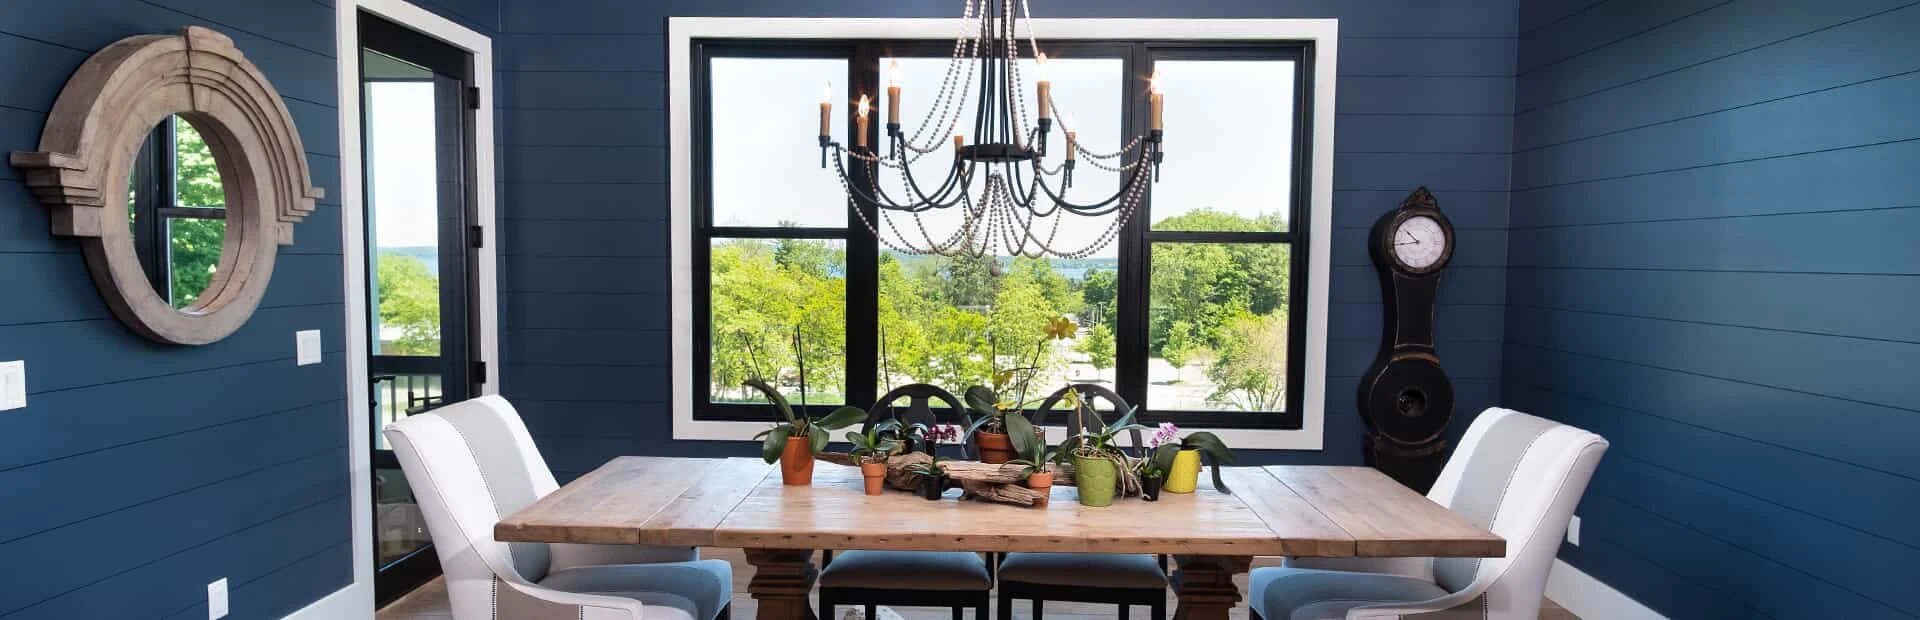 Dining room in original wall colors of dark blue overlooking a yard.